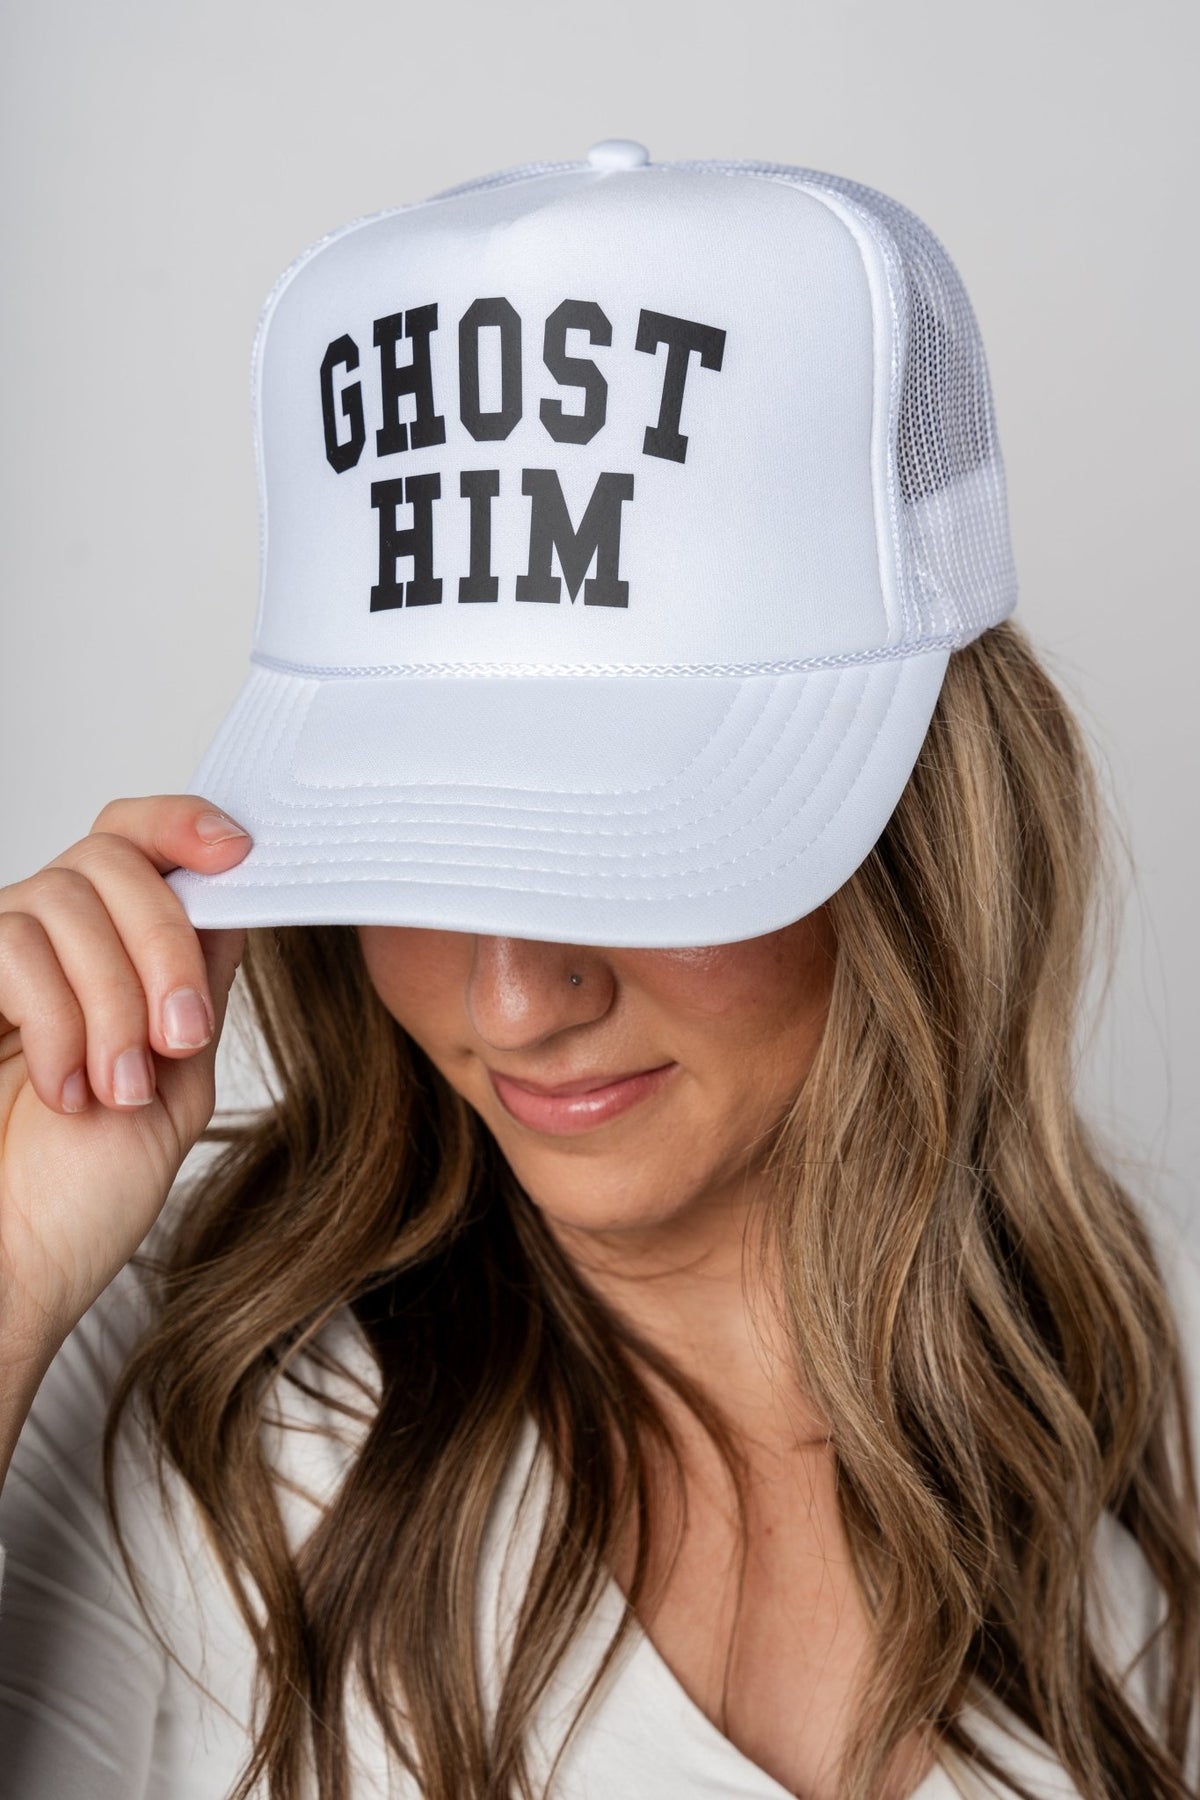 Ghost him trucker hat white - Trendy Hats at Lush Fashion Lounge Boutique in Oklahoma City